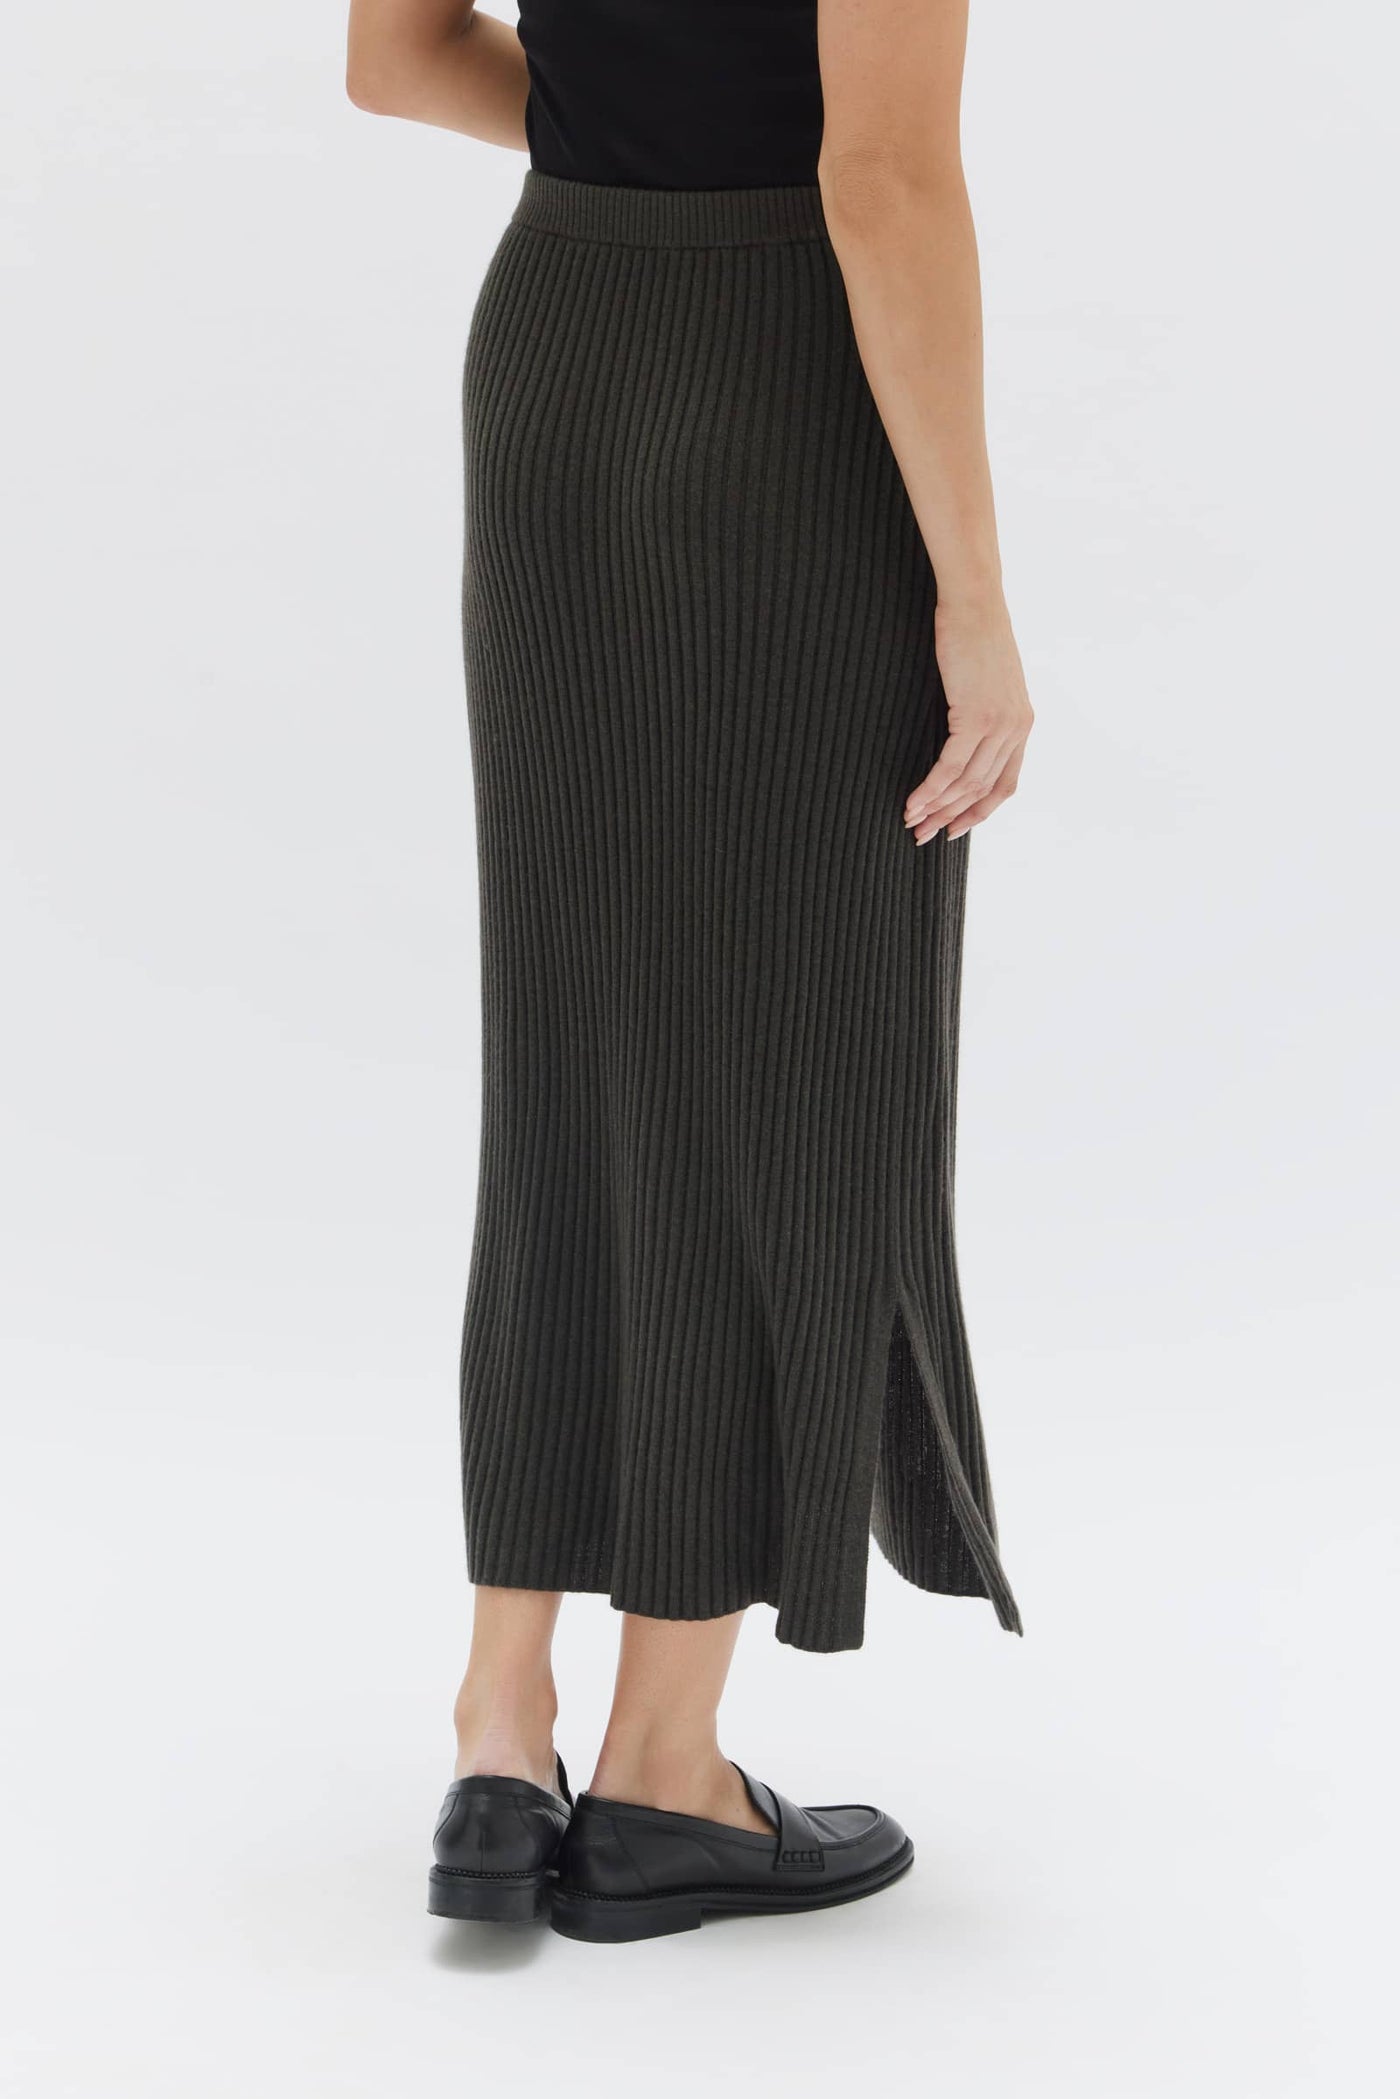 The Assembly Label Wool Cashmere Rib Skirt is a versatile piece that will take you from work to the weekend with ease. Crafted from a premium wool and cashmere blend, this ribbed knit skirt has a stretchy fit that skims the body and features an elasticised waistband and side hem splits. For a complete knit set, style with the coordinating Wool Cashmere Rib Long Sleeve Top.  90% Wool, 10% Cashmere Ribbed knit Elasticated waistband  Sizes 6,8,10,12